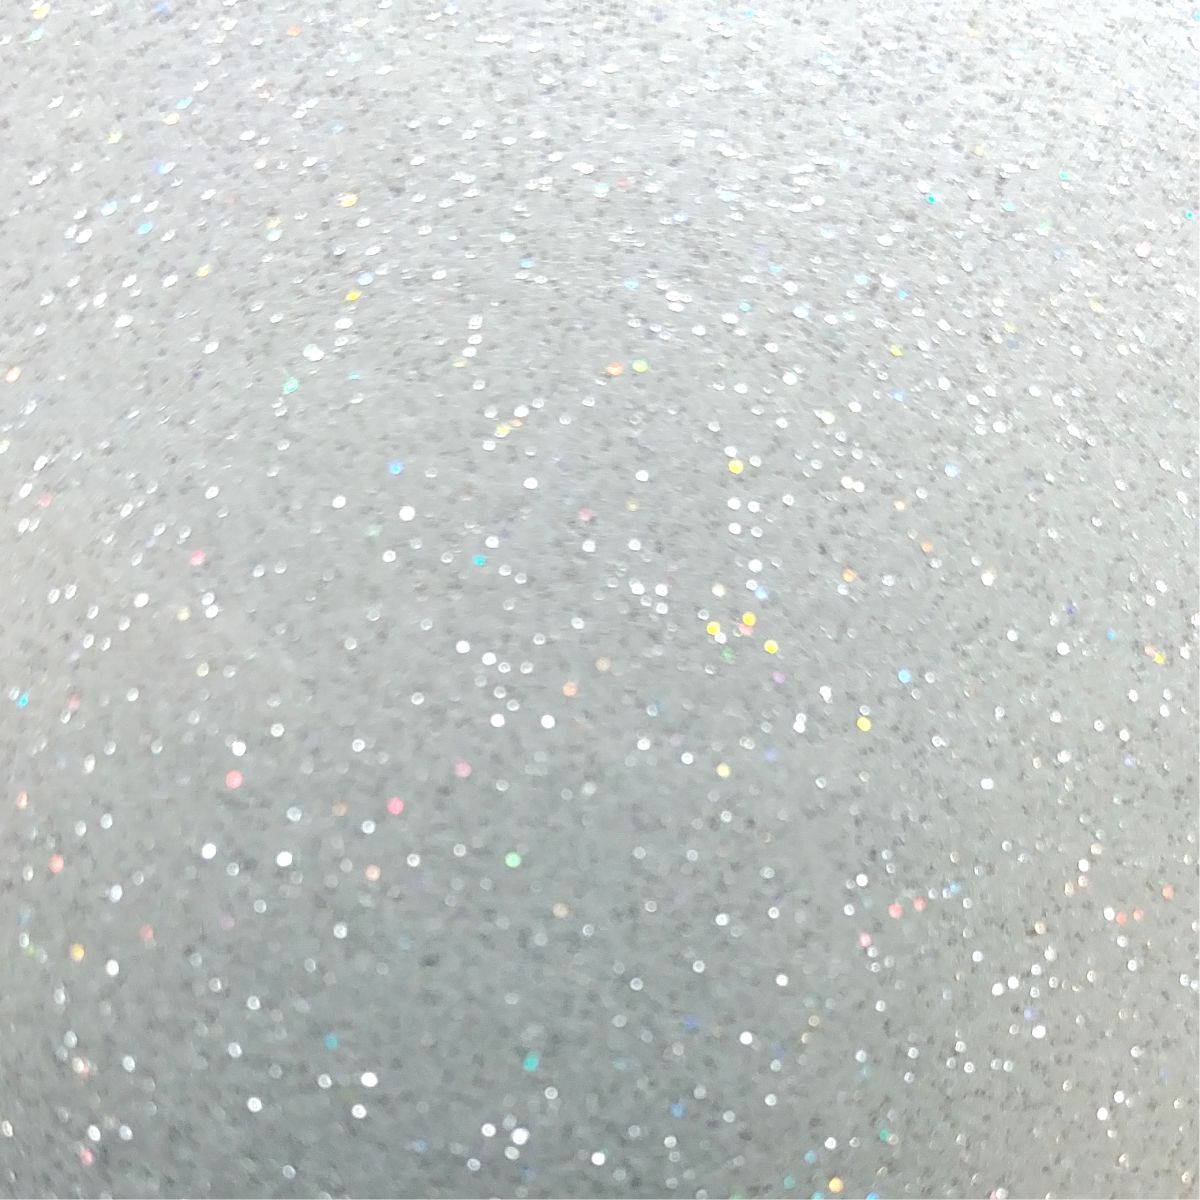 StyleTech Ultra FX Glitter - Silver Adhesive Vinyl Choose Your Length CLEARANCE